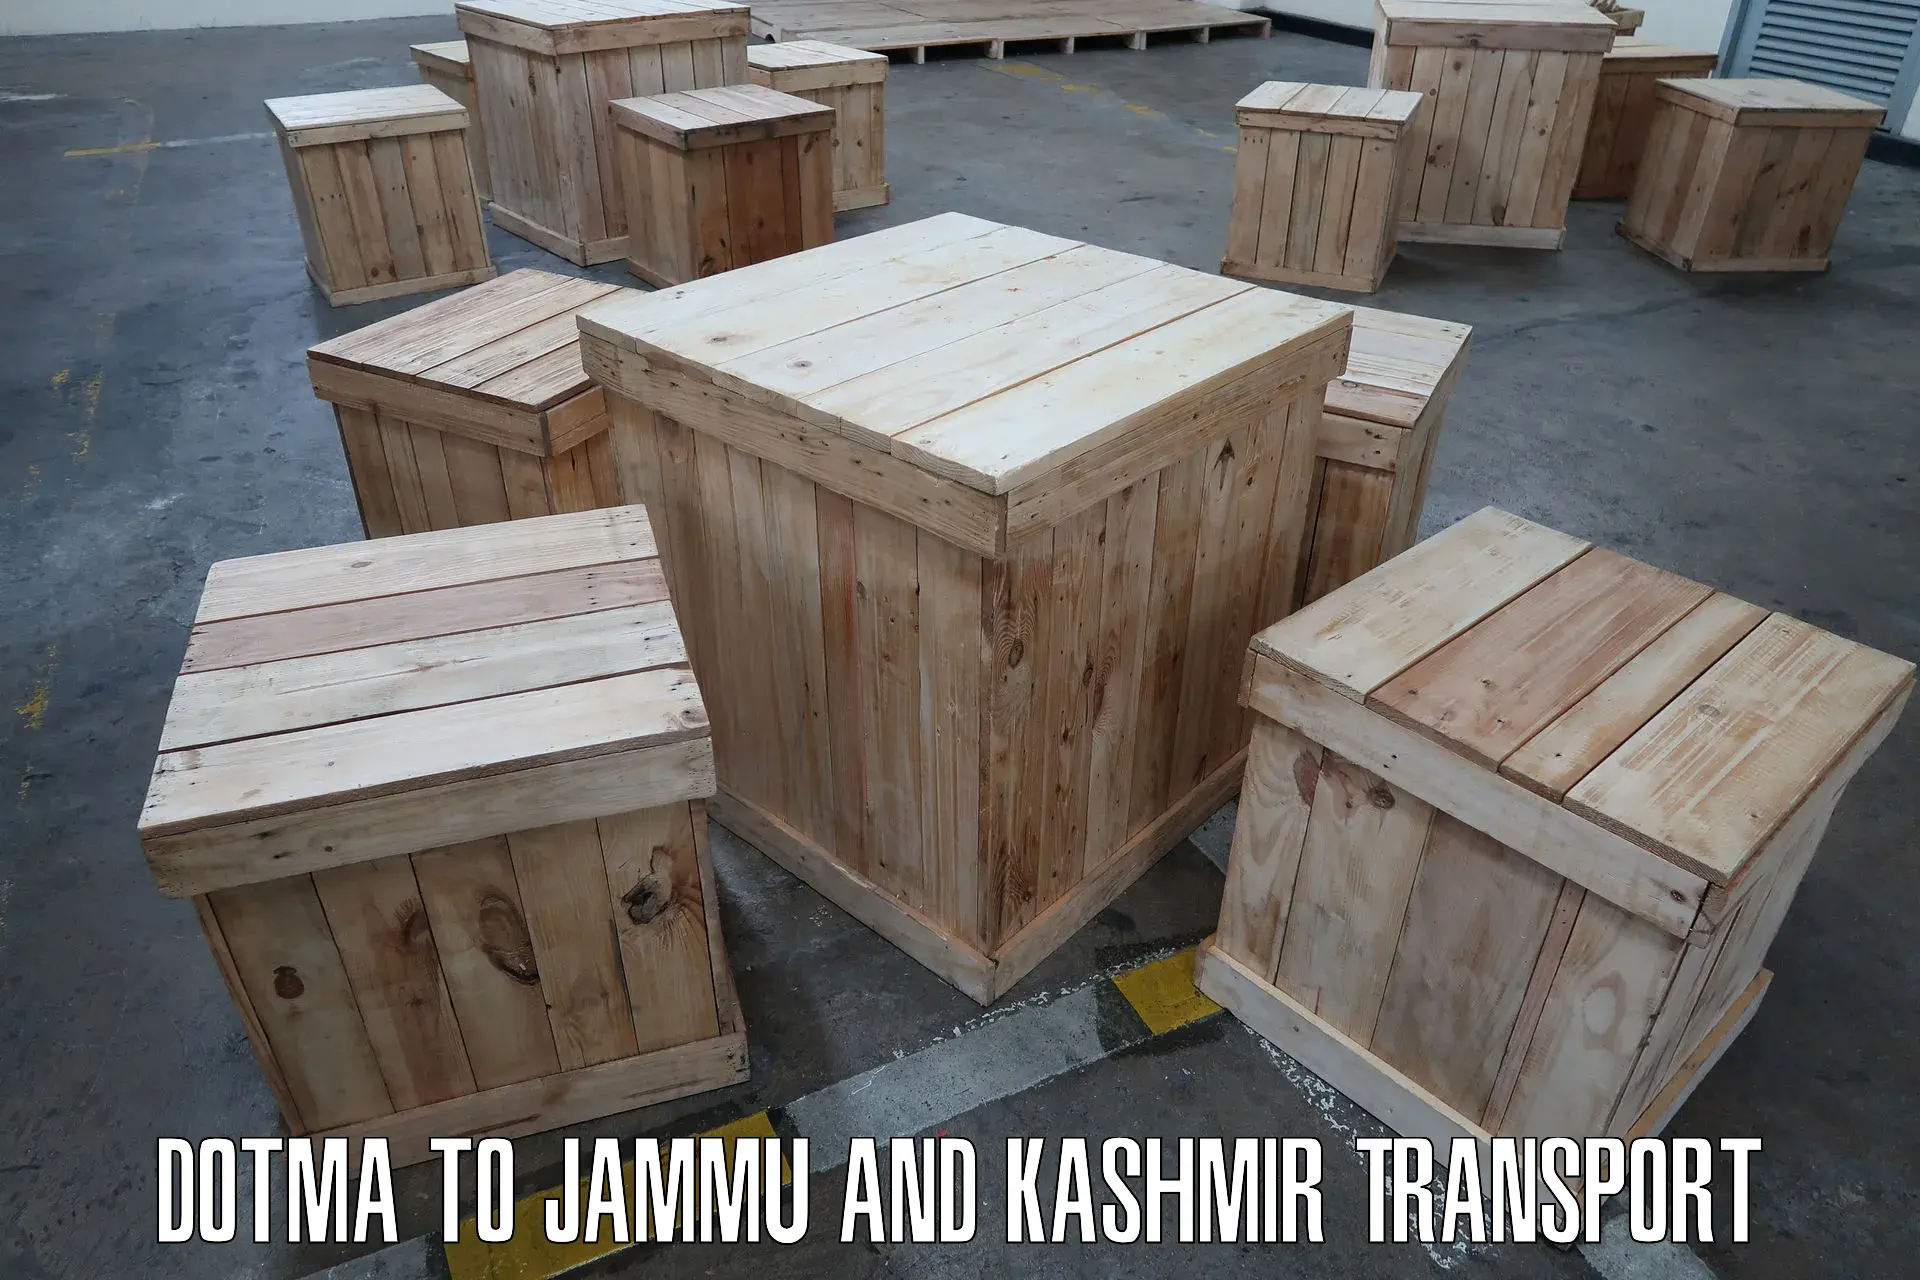 Two wheeler parcel service in Dotma to University of Jammu